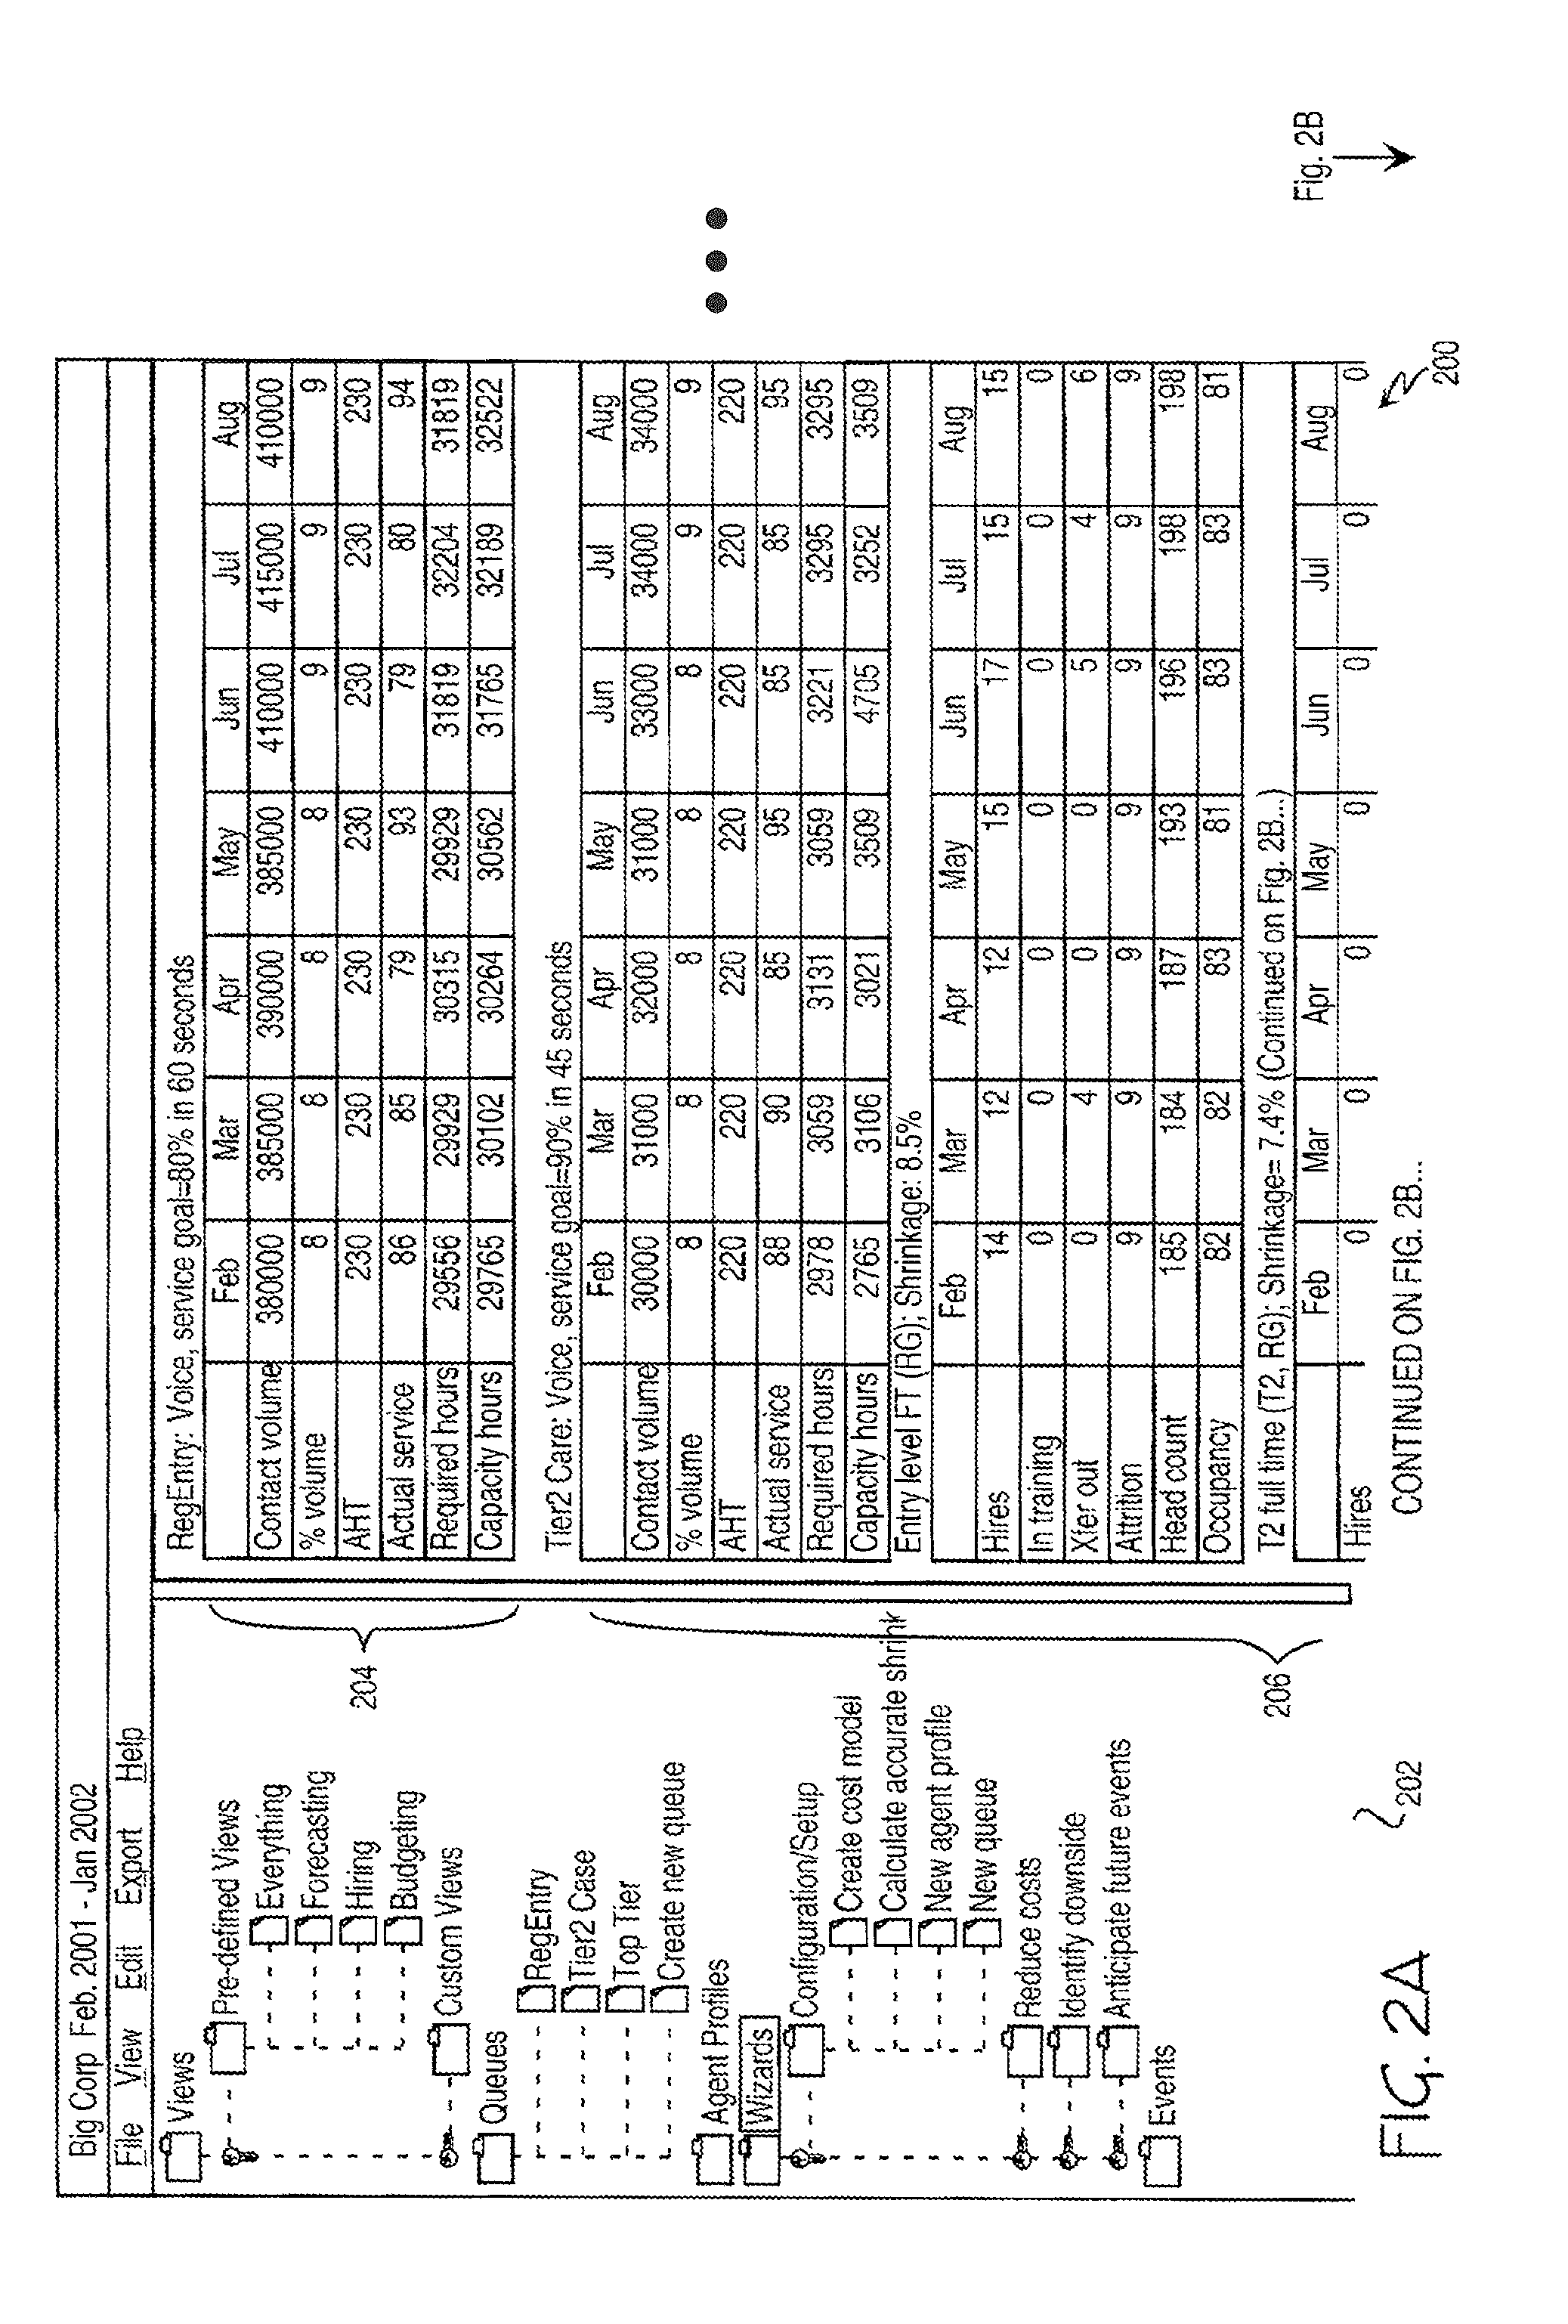 Method and apparatus for long-range planning